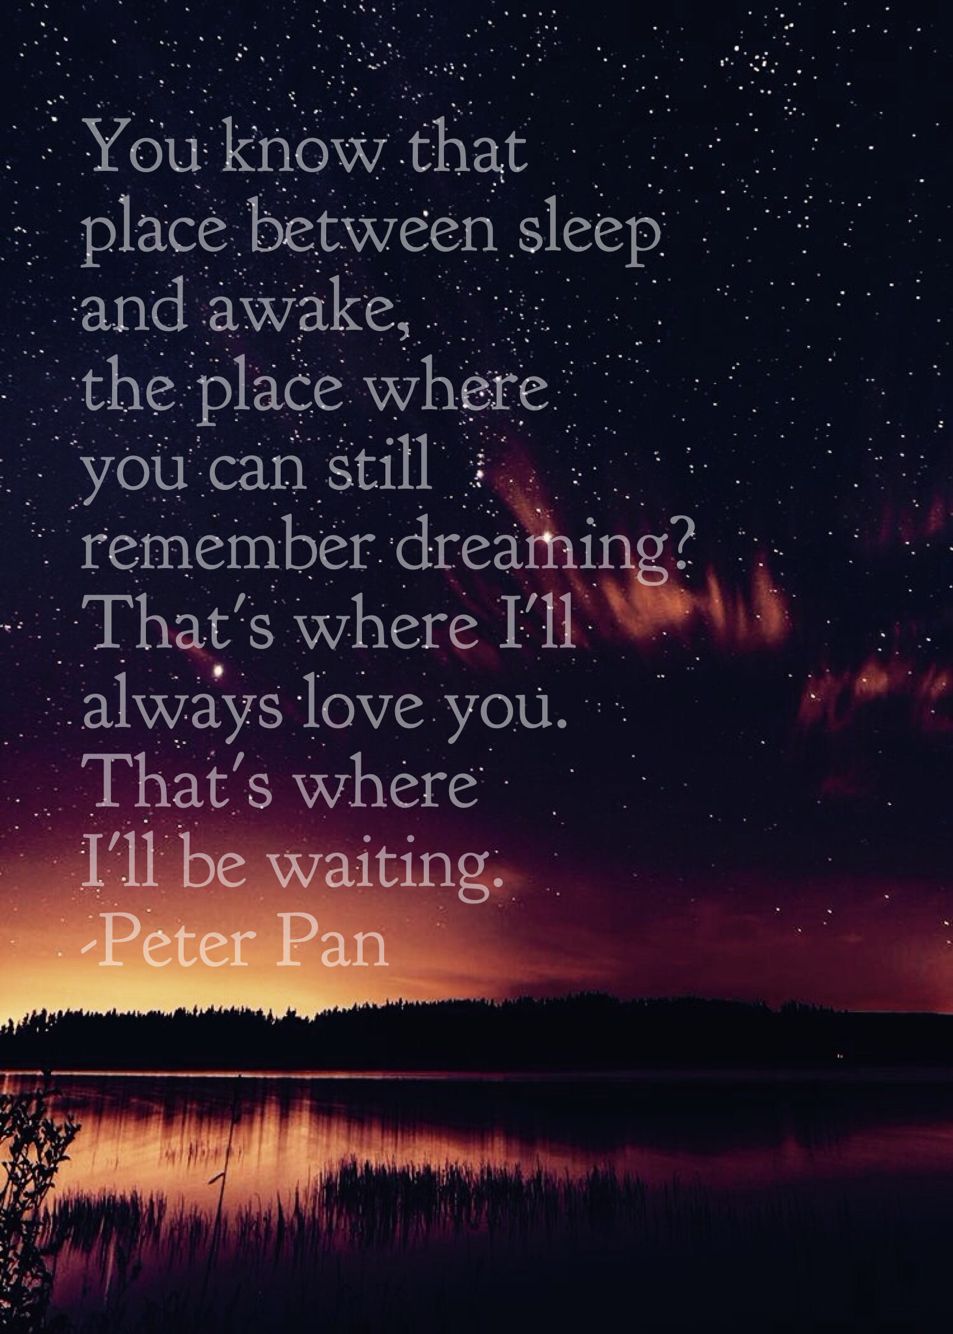 That's where I'll always love you (Peter Pan), wallpaper, quotes. Ma. Phone wallpaper quotes, Quote background, Wallpaper iphone quotes background